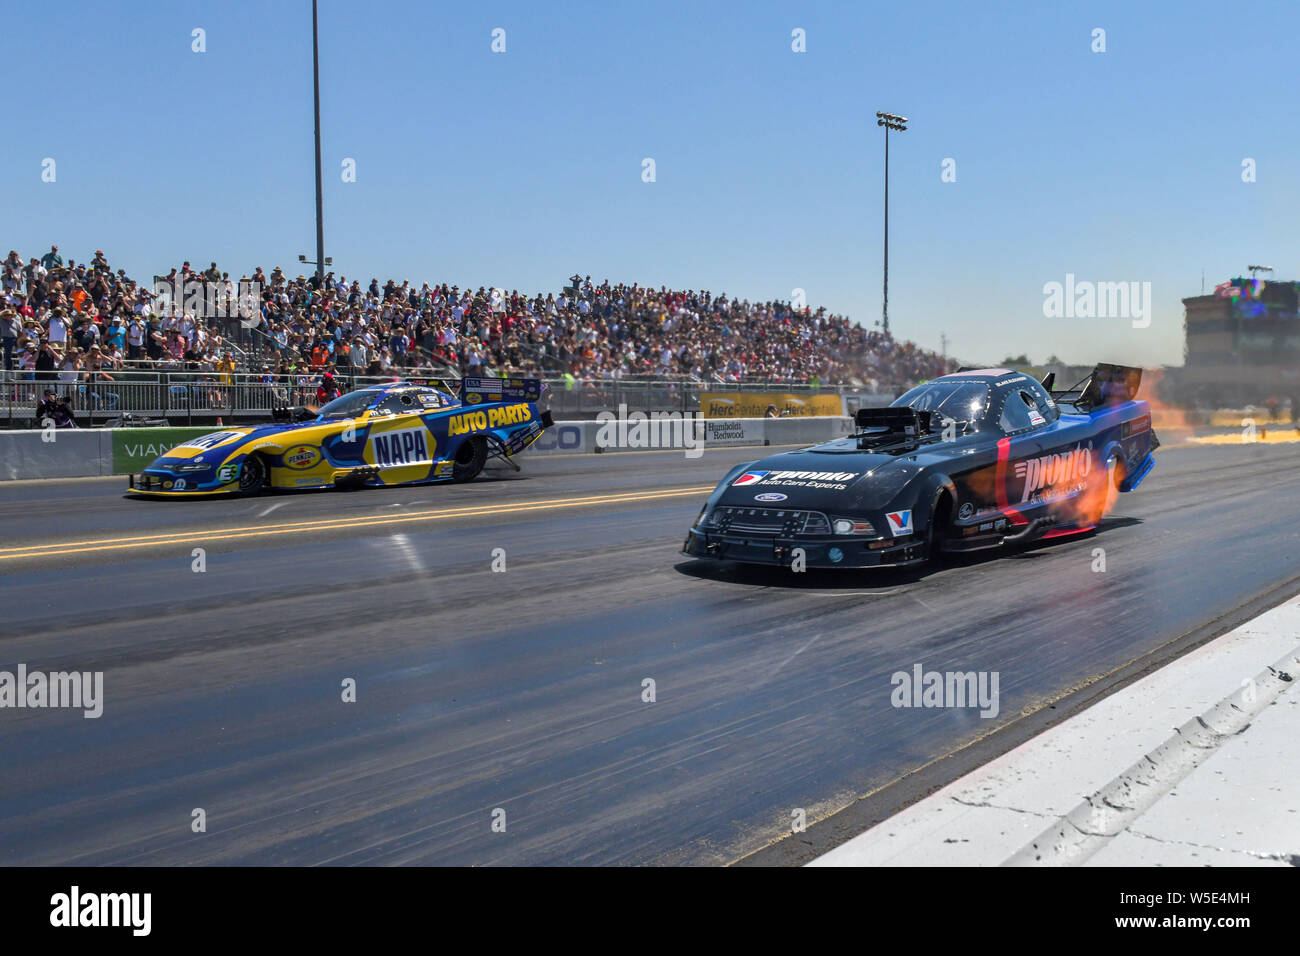 Sonoma, California, USA. 28th July, 2019. Ronn Capps in his NAPA funny car runs next to Blake Alexander in his Pronto car in the first round of eliminations during the NHRA Sonoma Nationals at Sonoma Raceway in Sonoma, California. Chris Brown/CSM/Alamy Live News Stock Photo